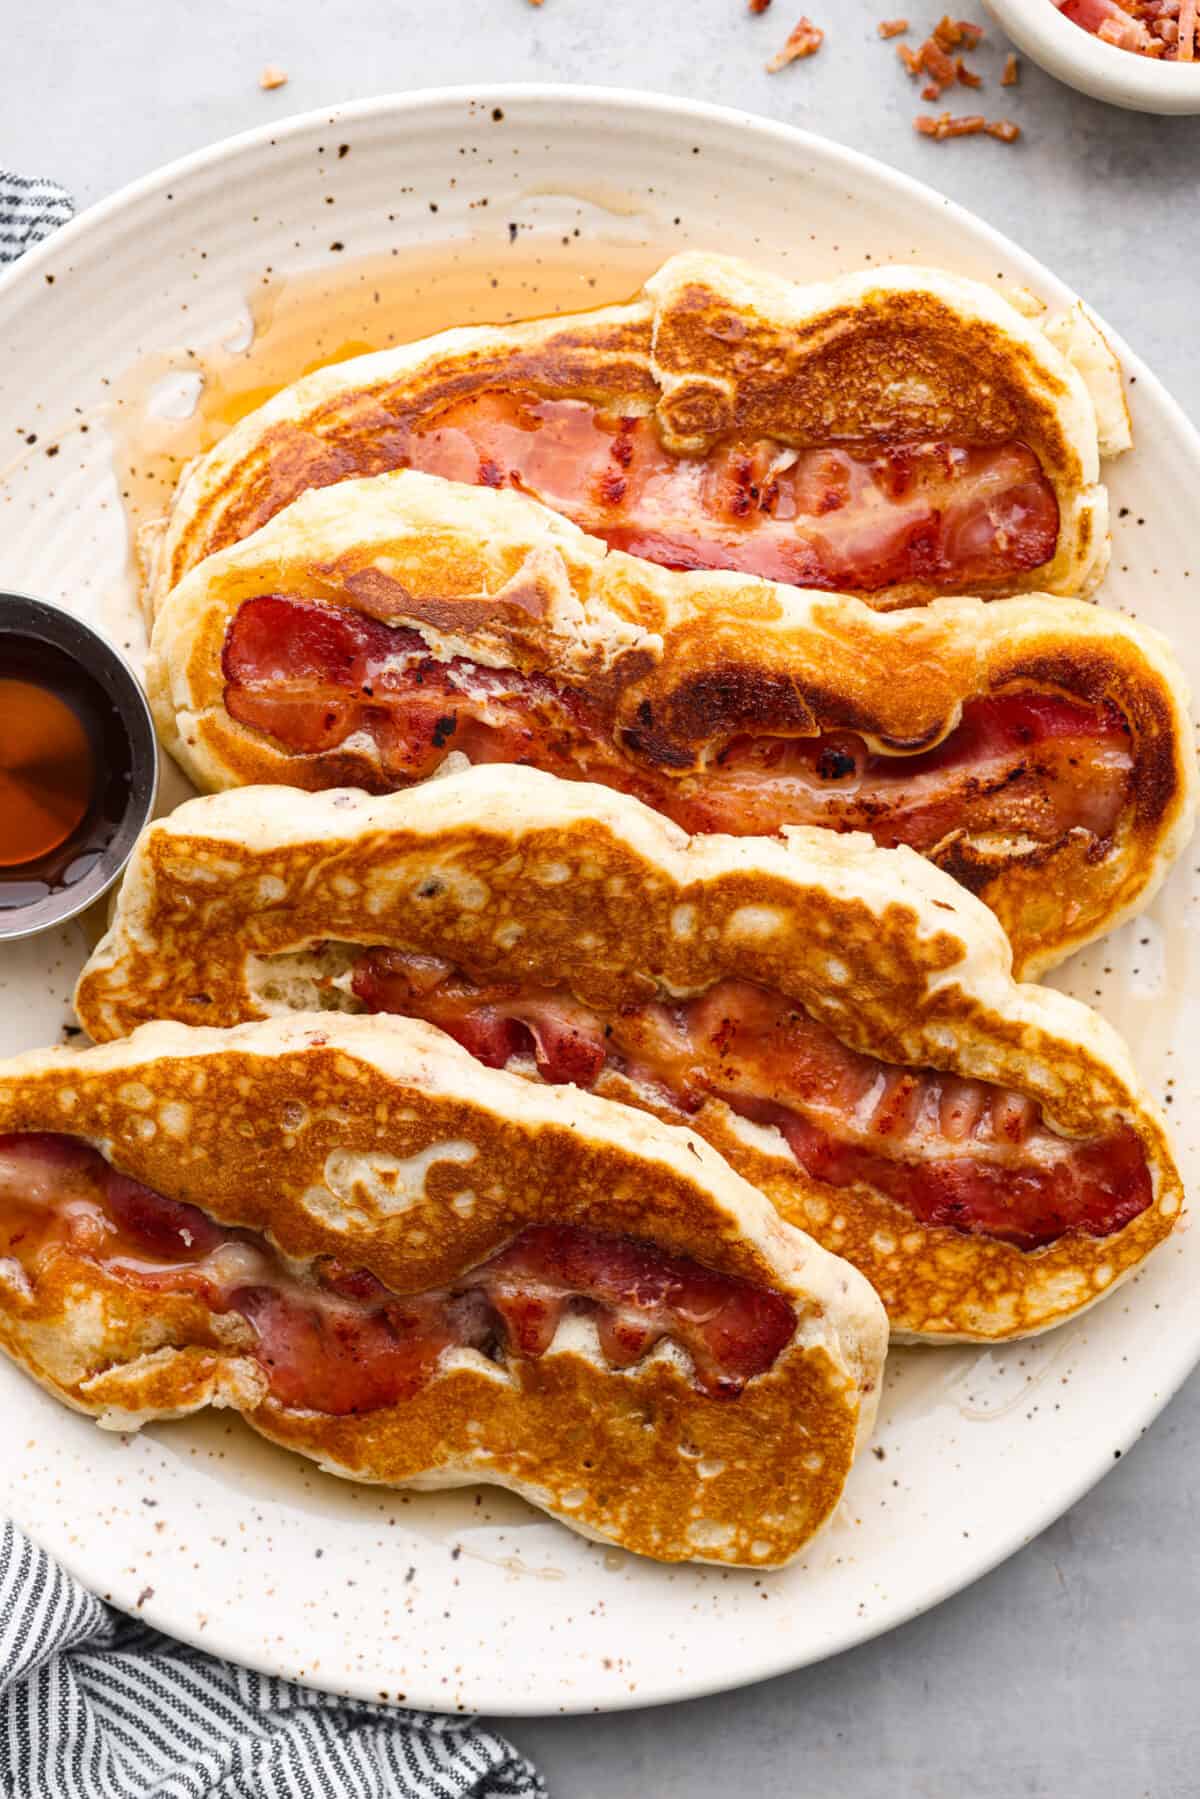 4 bacon pancakes on a plate.